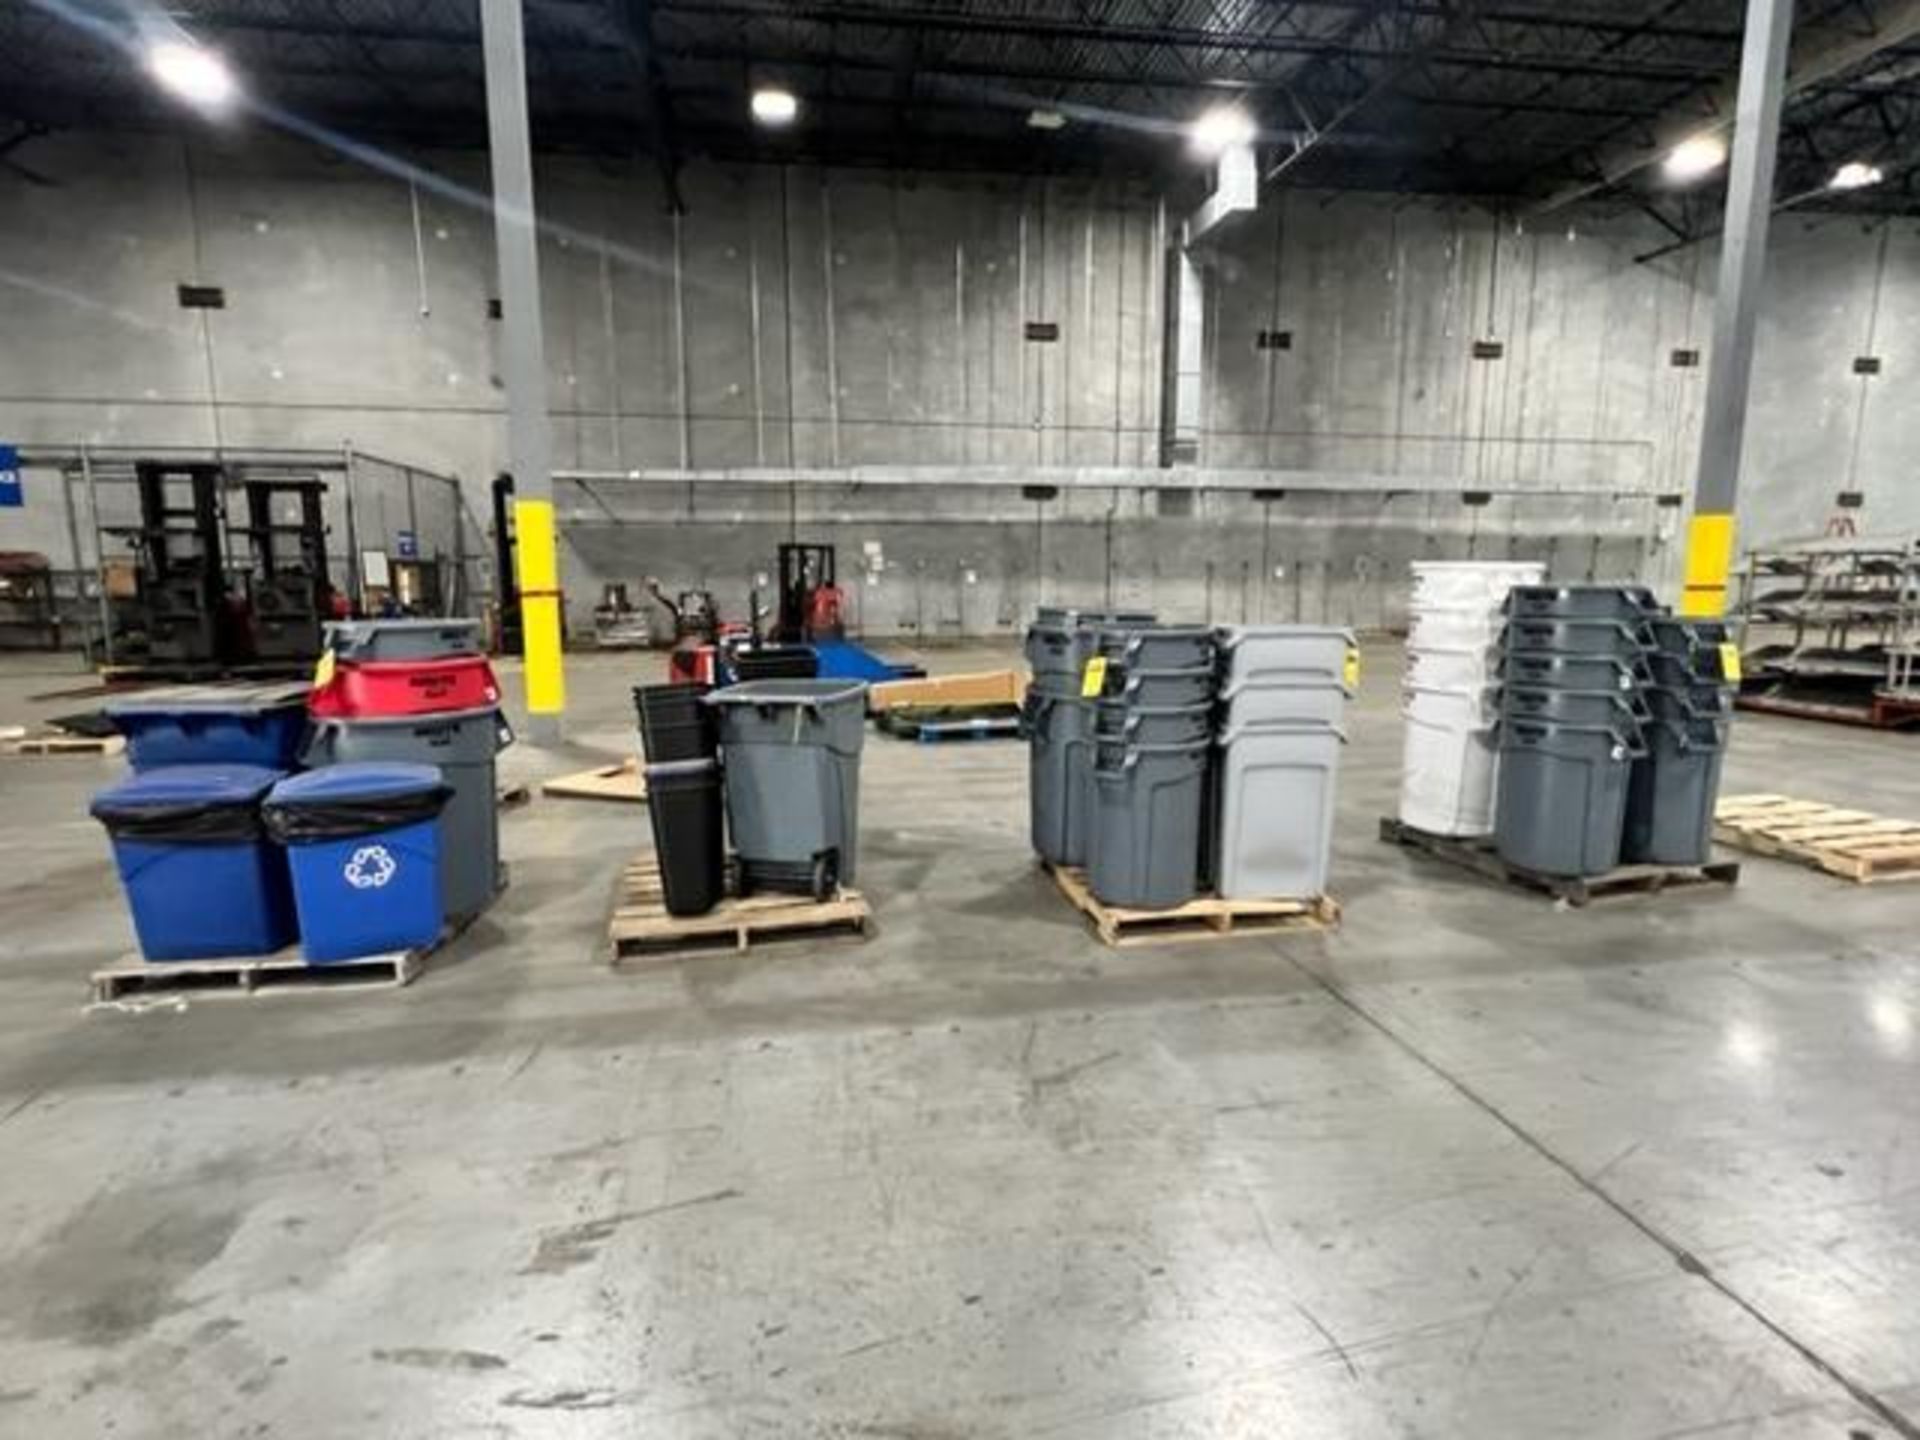 (4) Pallets of Assorted Size Garbage Cans ($25 Loading fee will be added to buyers invoice)